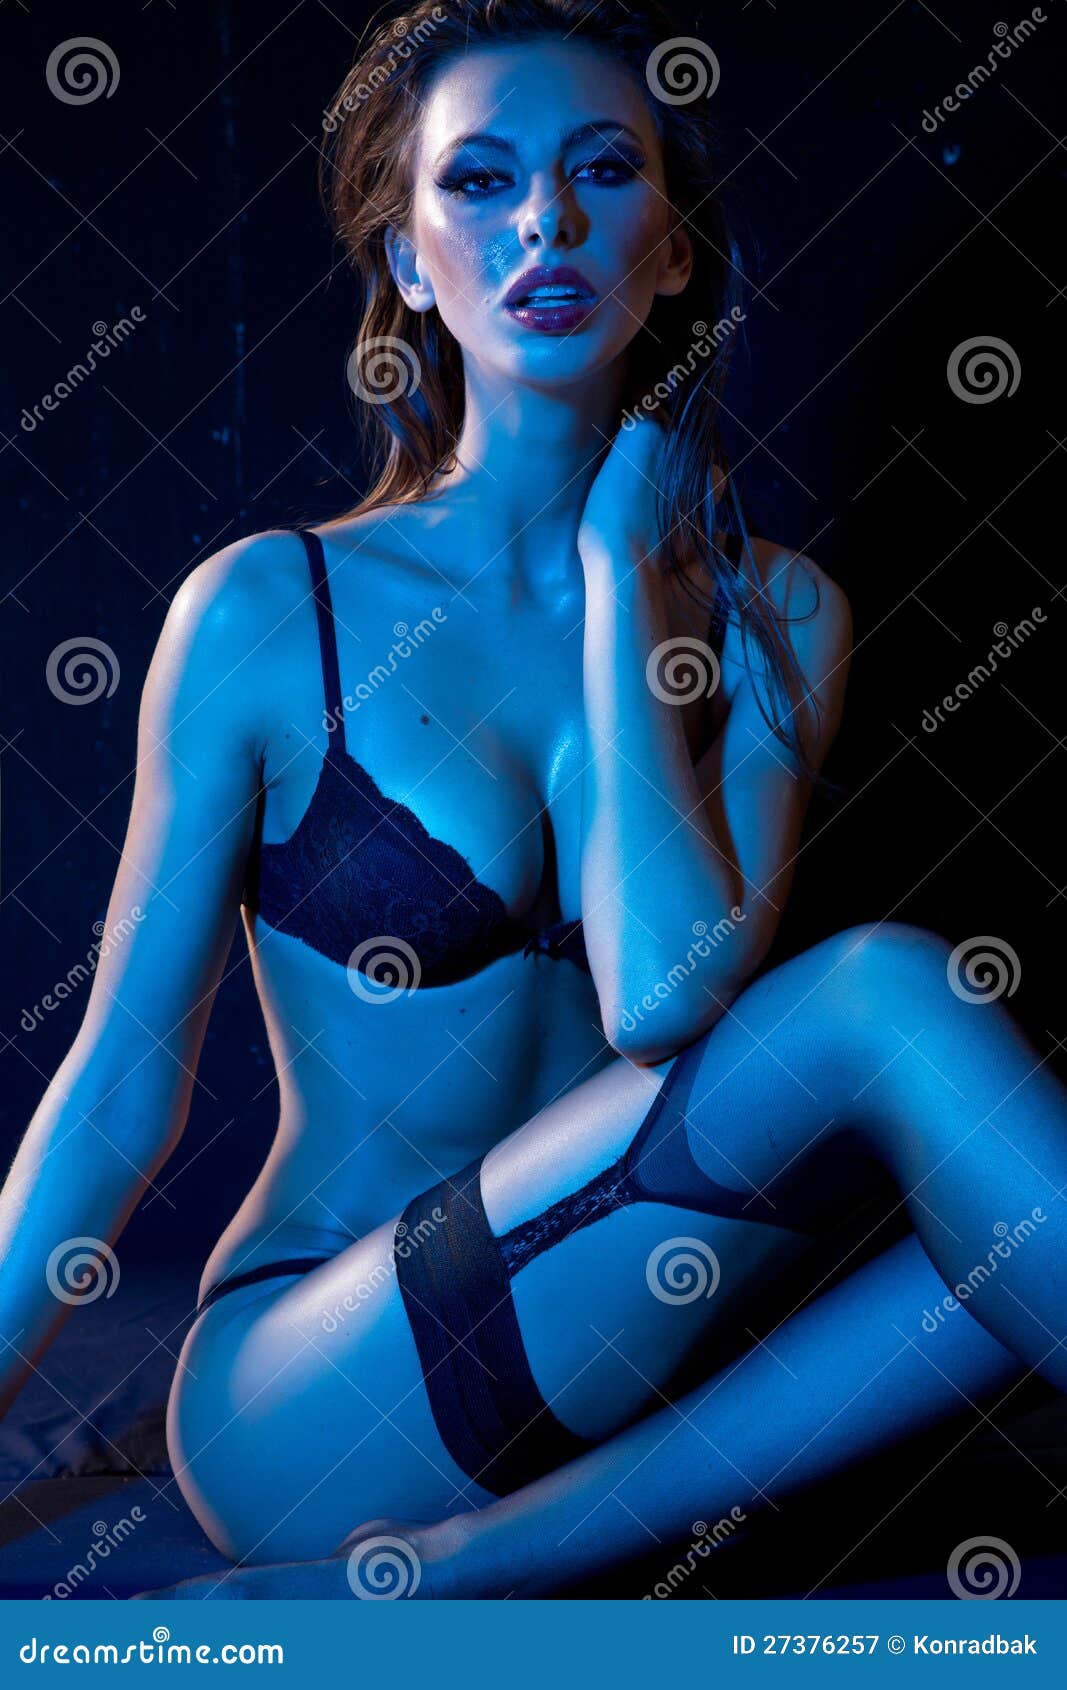 woman in lingerie waiting for her husband